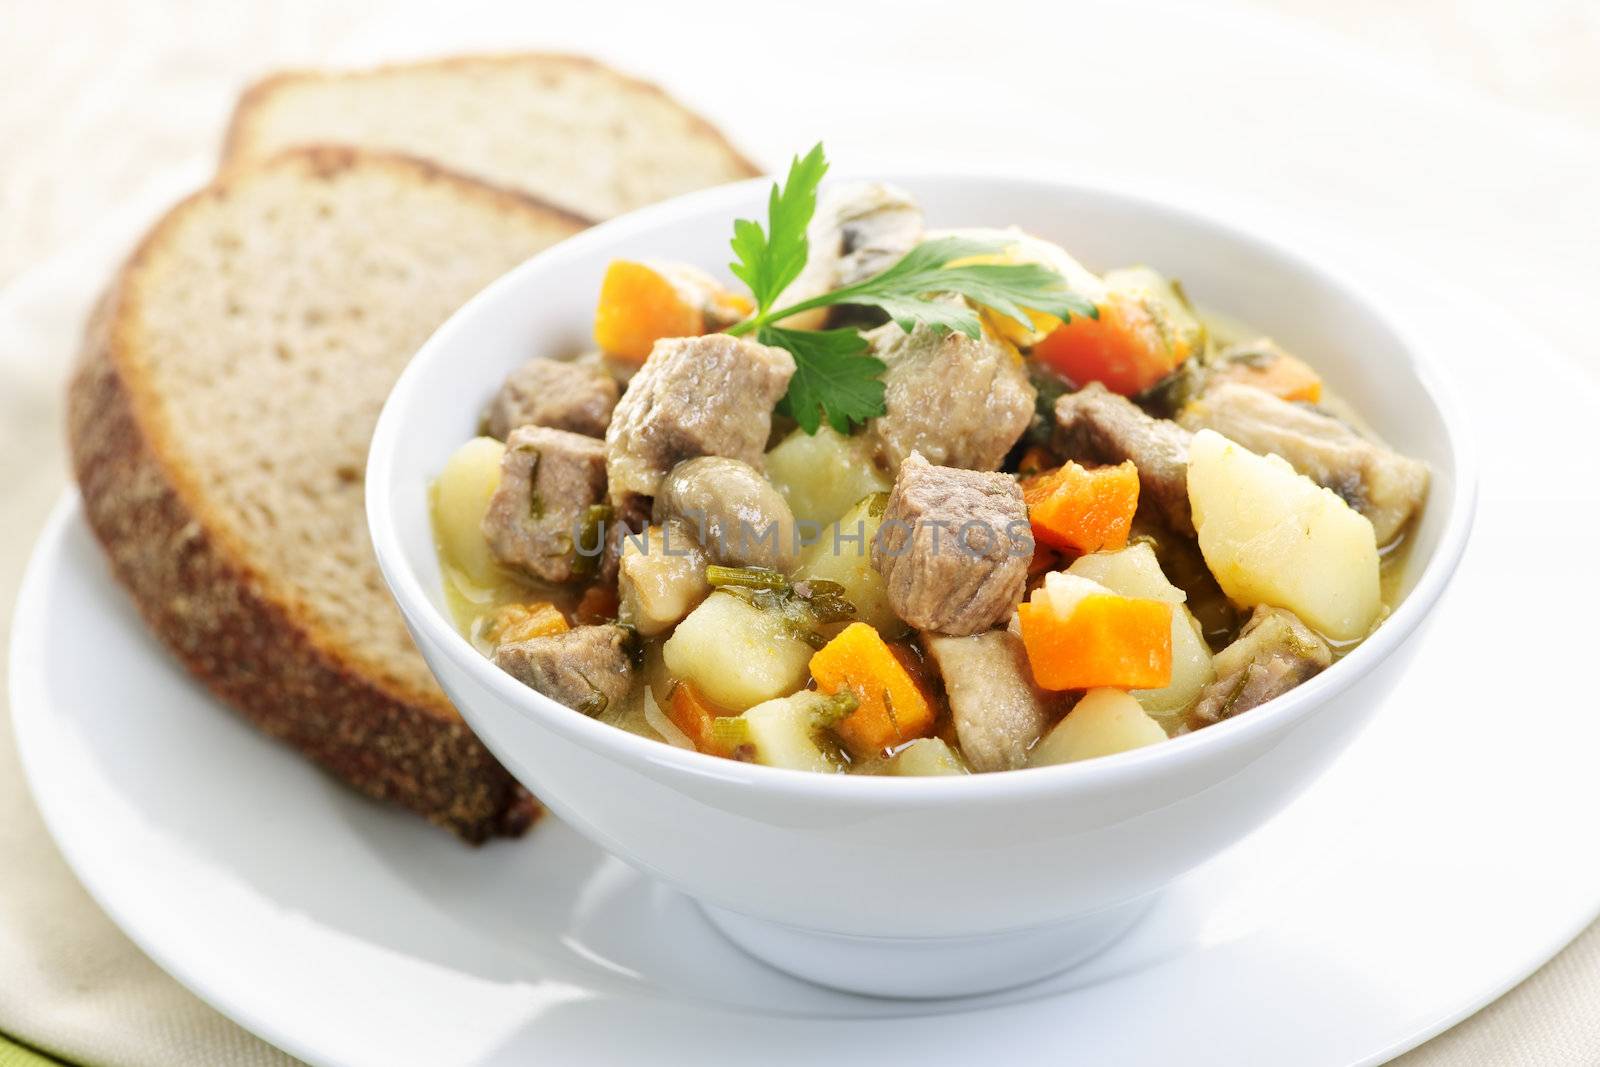 Bowl of hearty beef stew with vegetables served with rye bread